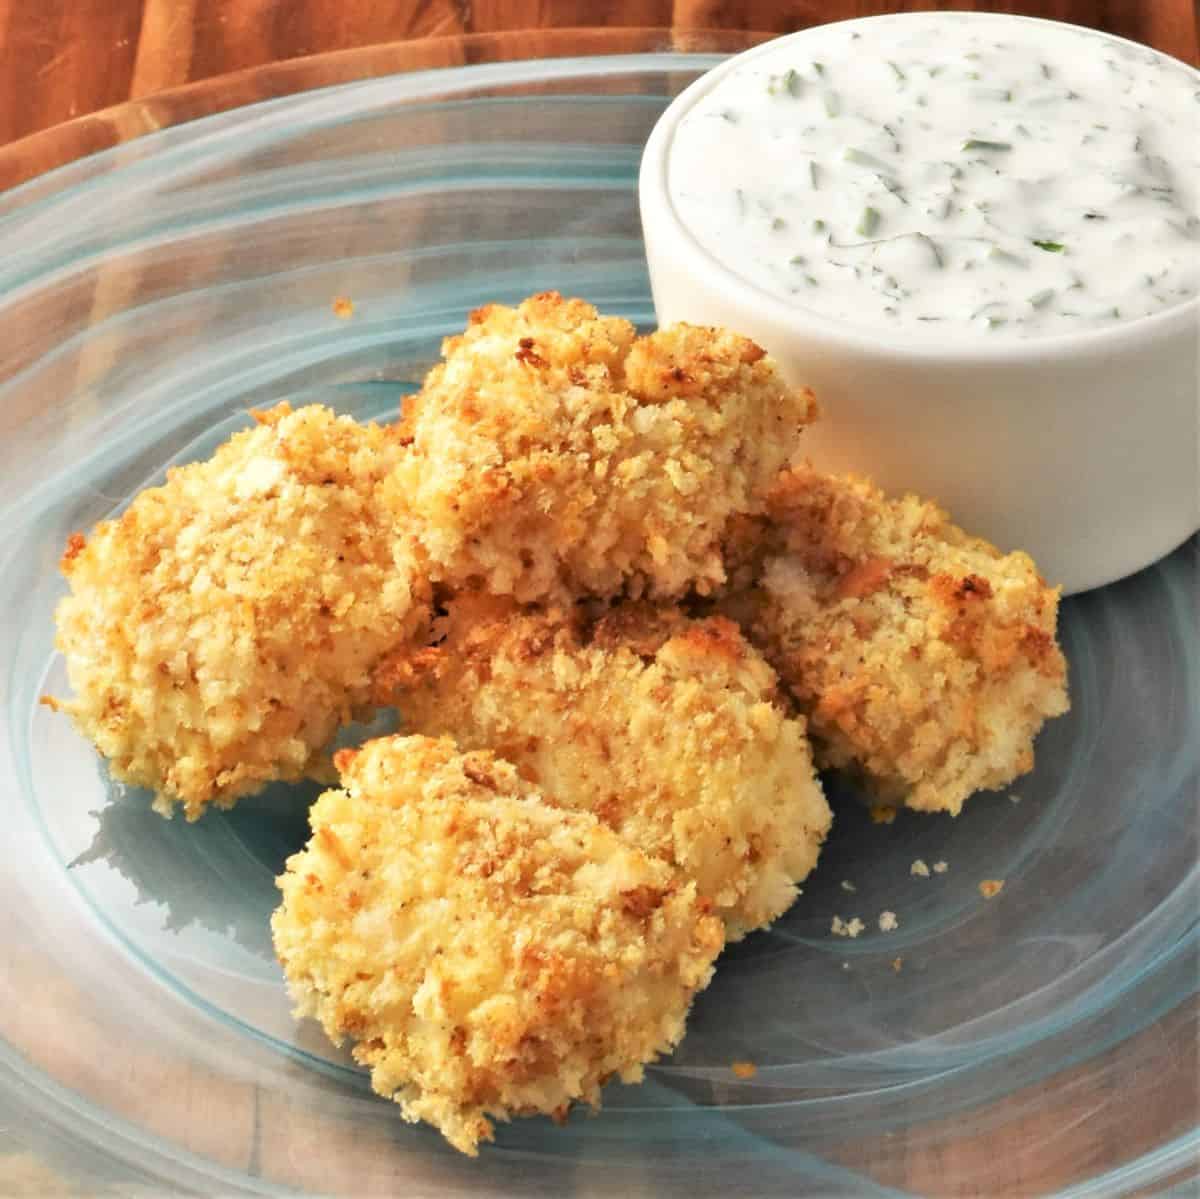 Side view of breaded fish nuggets on top of blue plate with yogurt sauce.